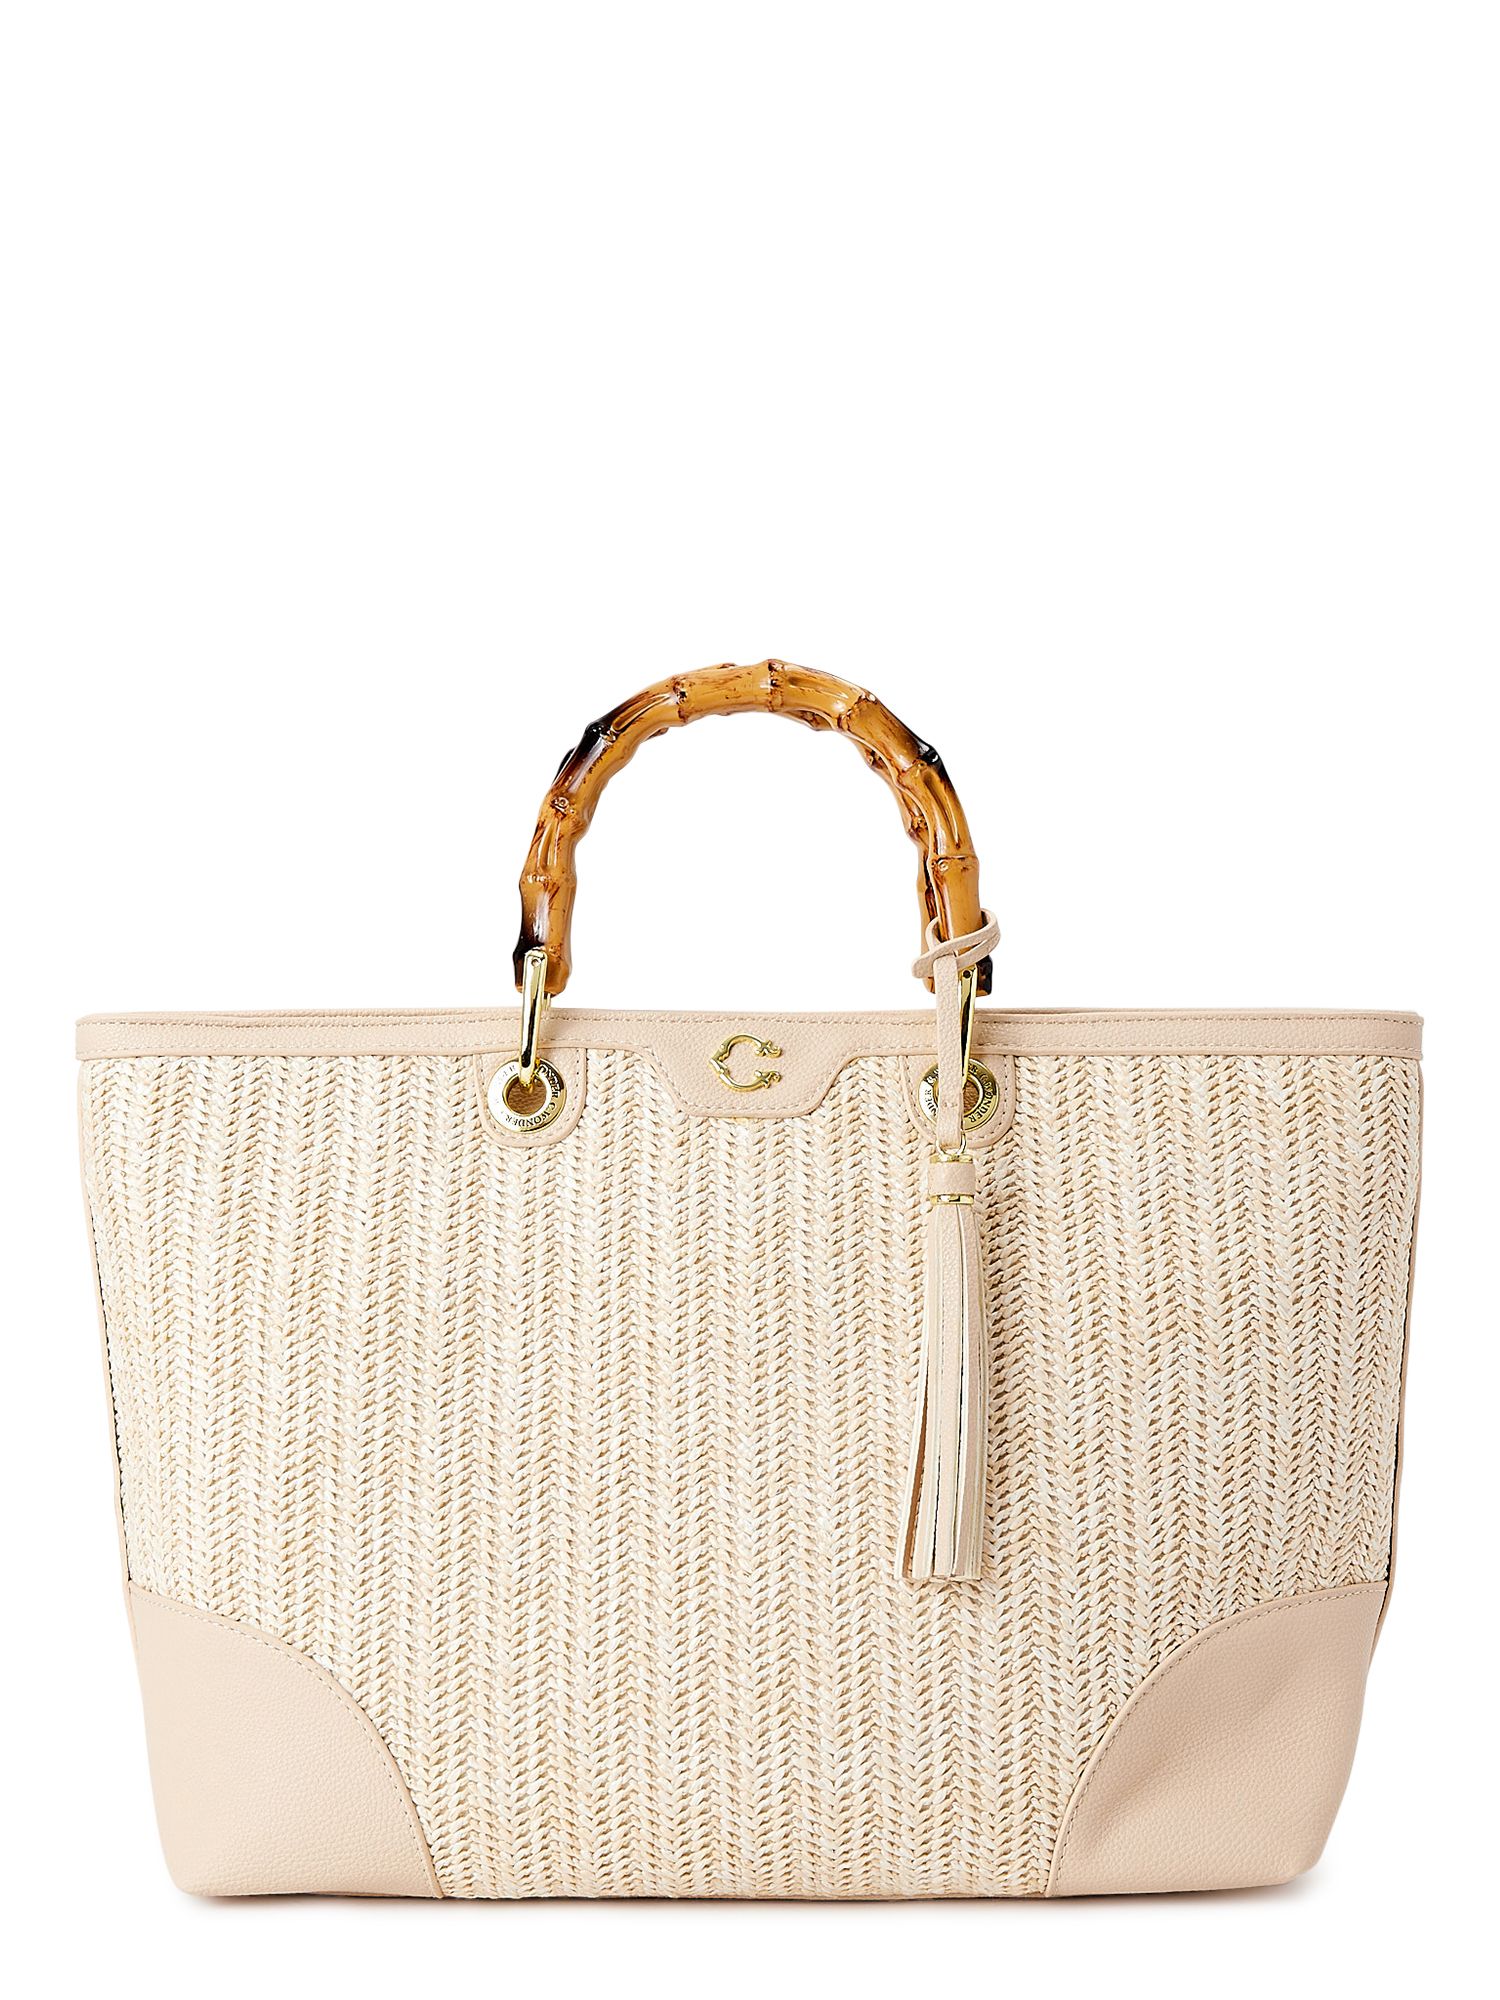 C. Wonder Women’s Adult Juno Faux Straw Tote Bag with Bamboo-Look Handles Wheat | Walmart (US)